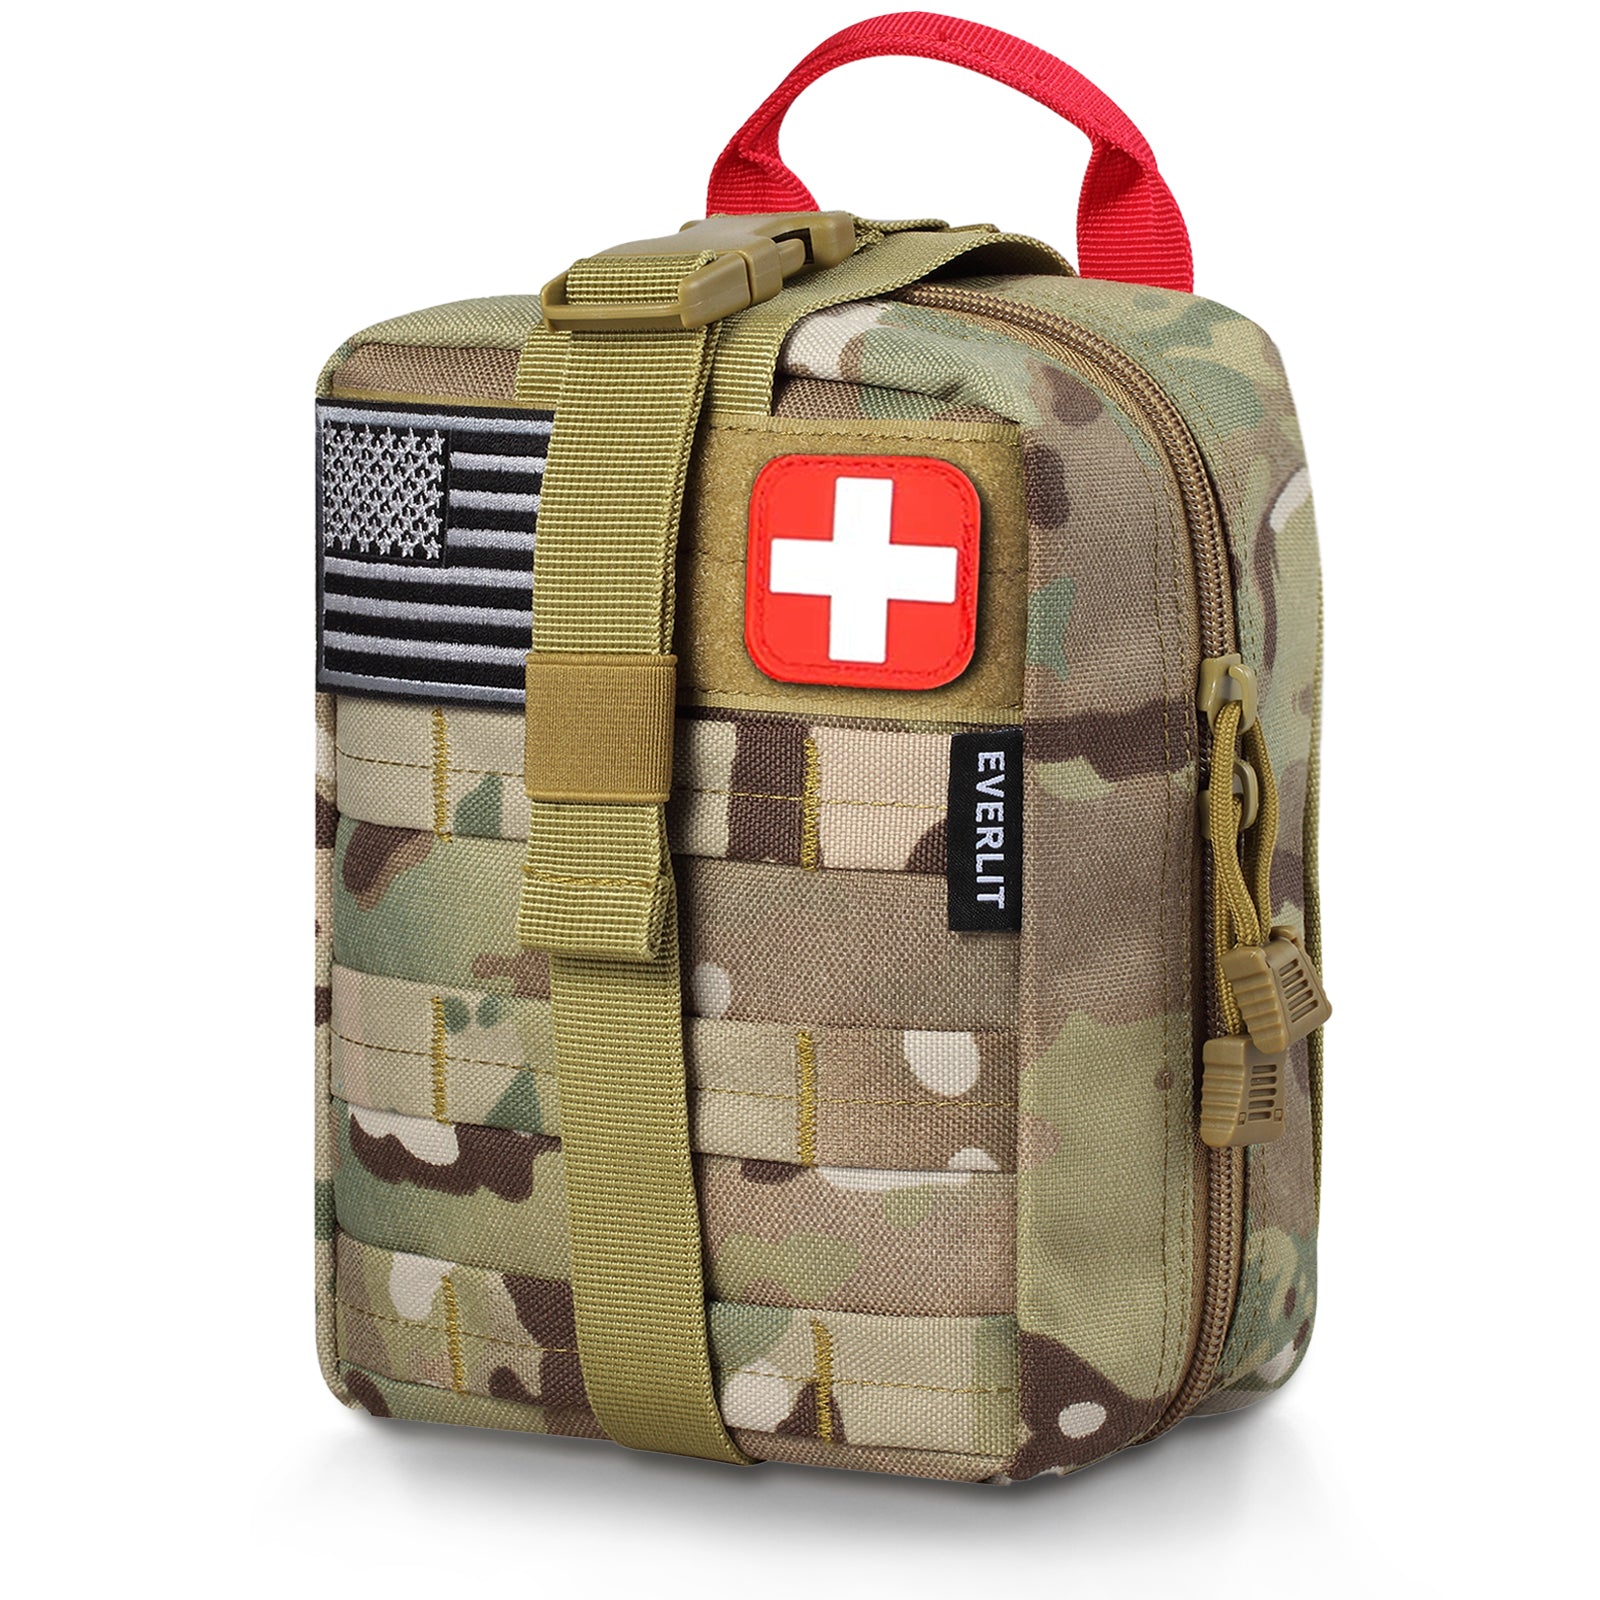 ESSENTIAL SURVIVAL FIRST AID KIT